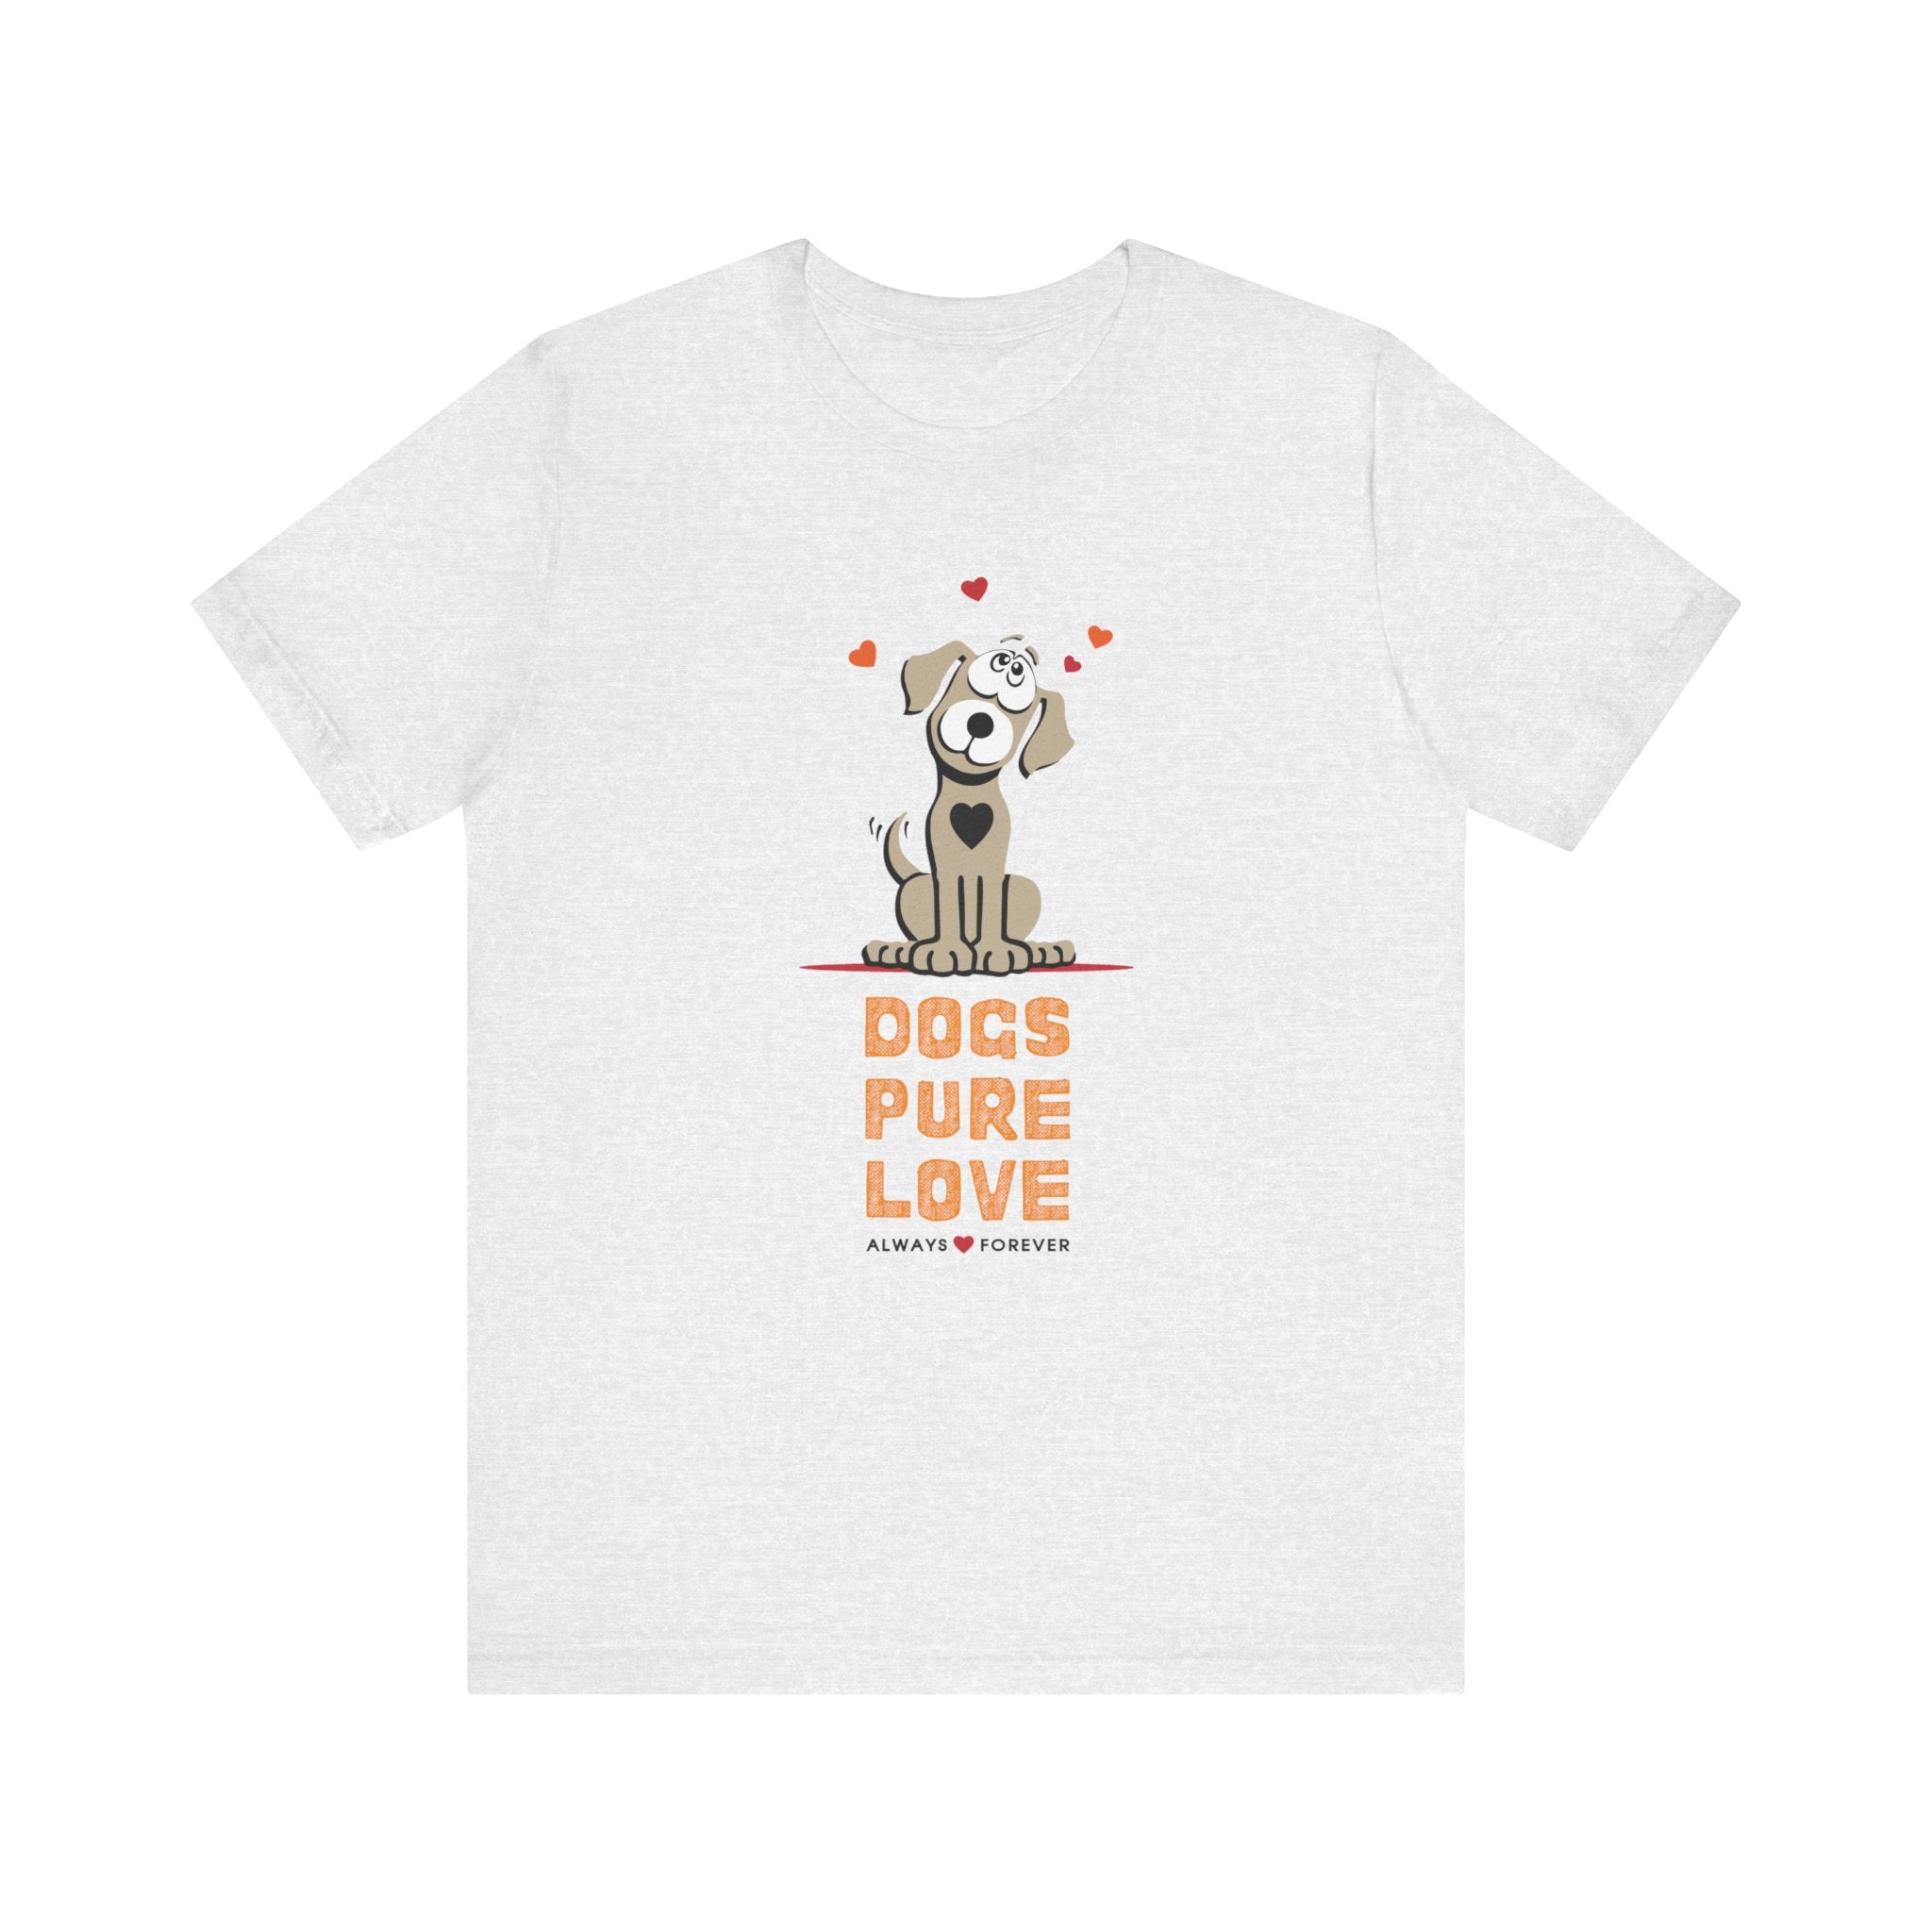 On a pristine white surface, an ash-colored unisex tee features the Dogs Pure Love logo.